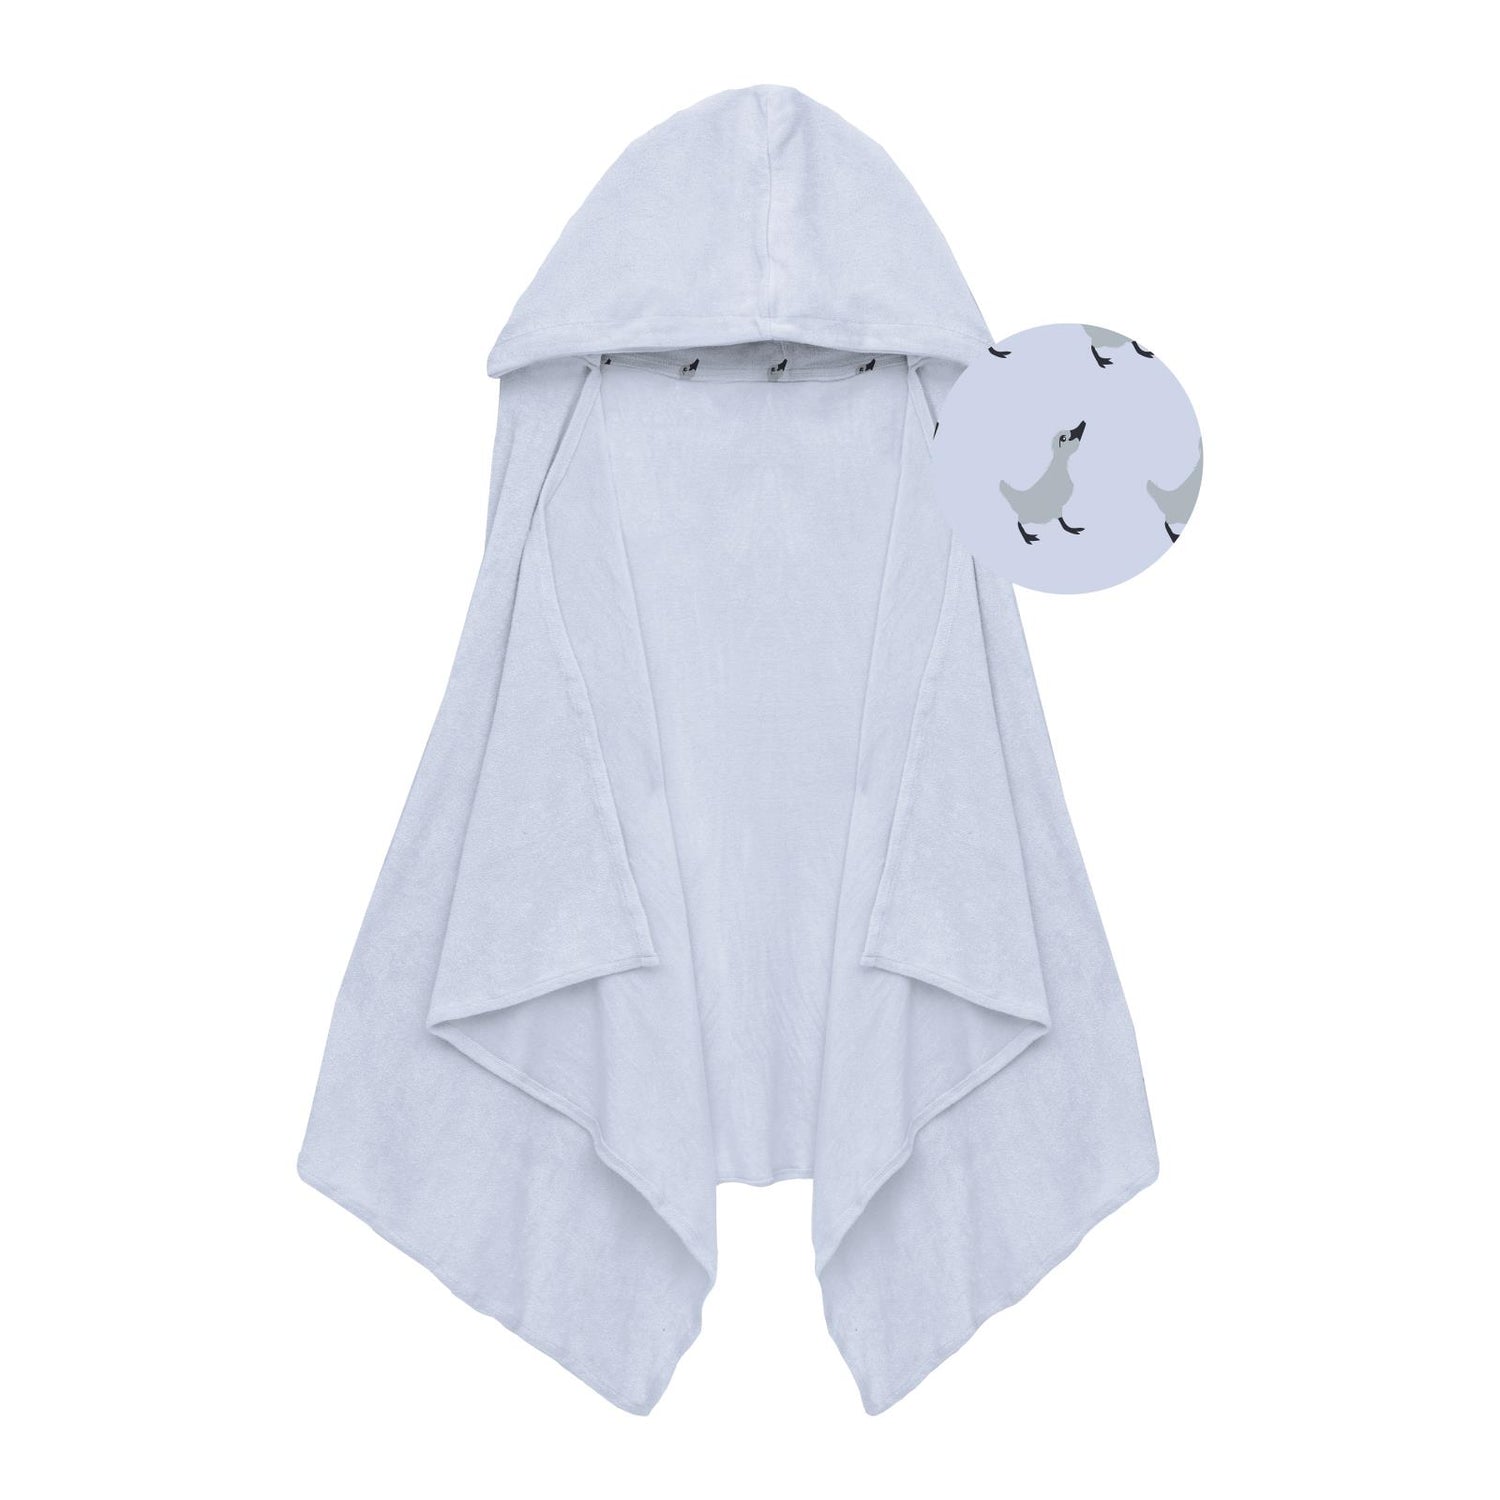 Terry Hooded Towel with Print Lined Hood in Dew with Dew Ugly Duckling